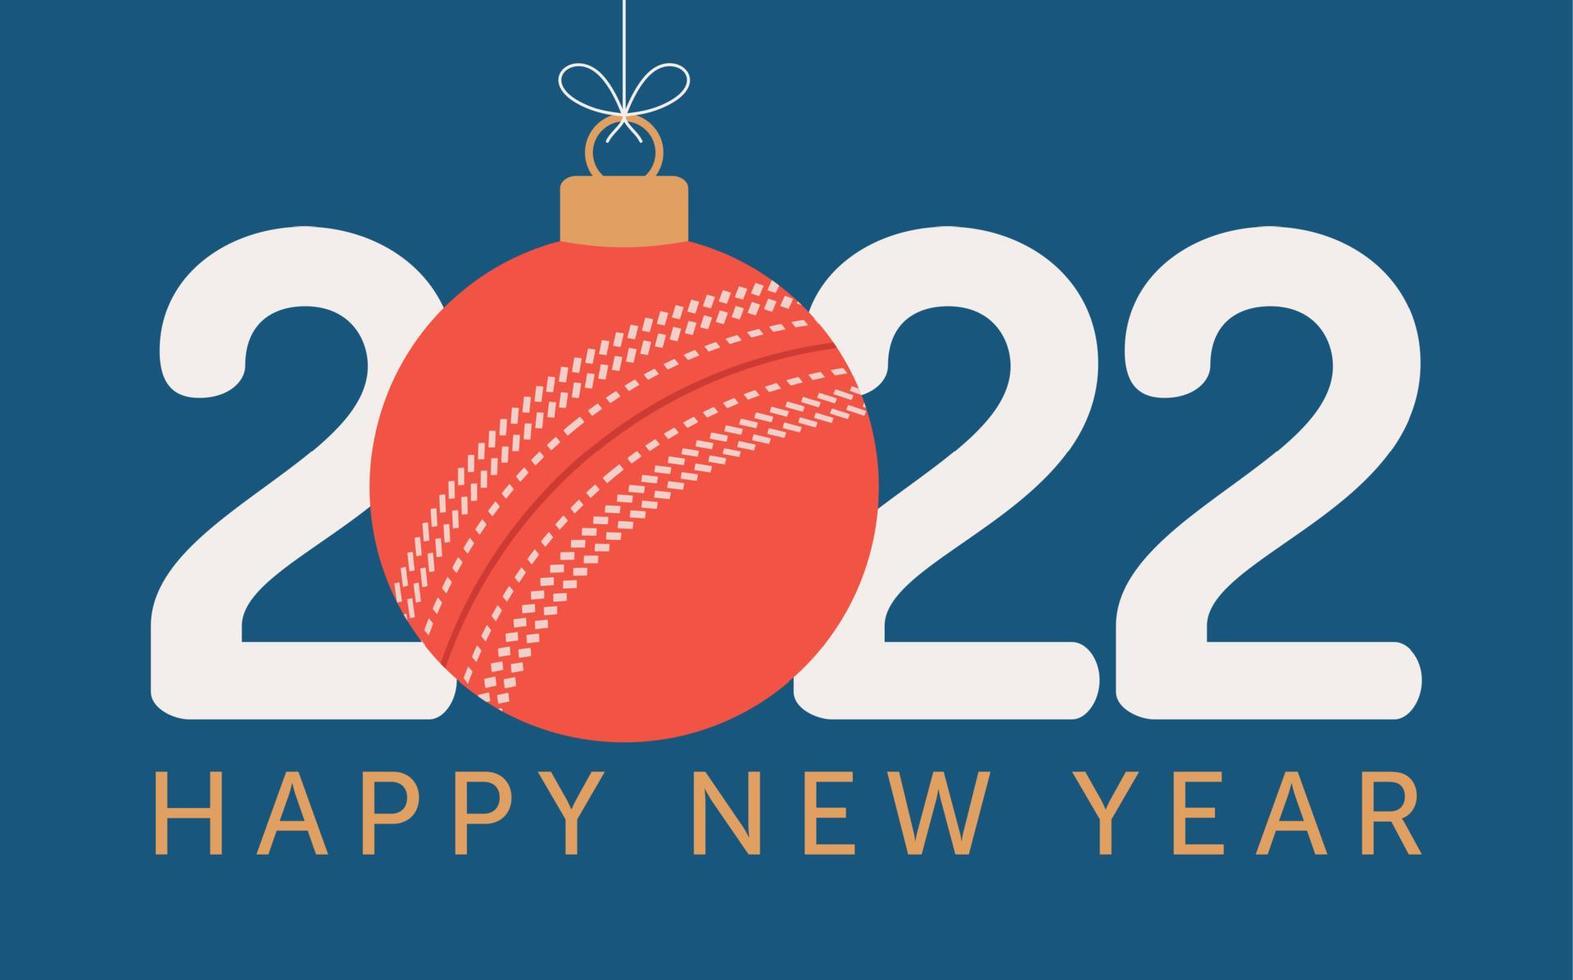 2022 Happy New Year cricket vector illustration. Flat style Sports 2022 greeting card with a cricket ball on the color background. Vector illustration.